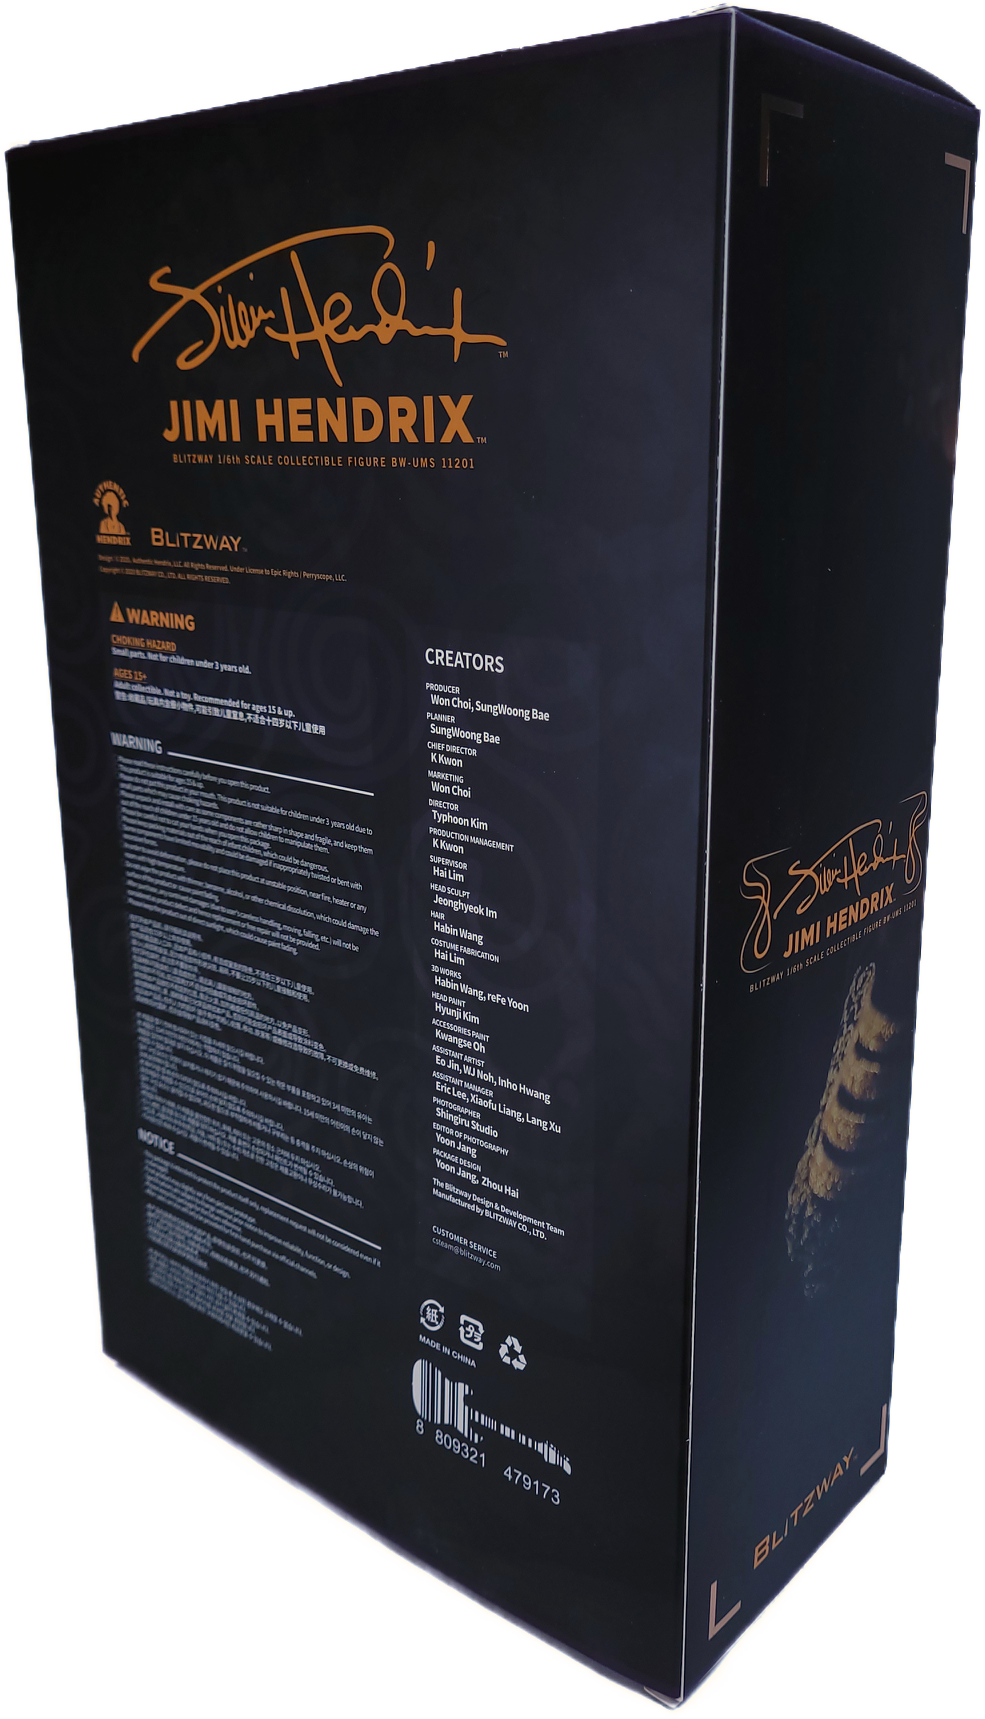 OPENED ITEM: Jimi Hendrix Collectible 2020 Blitzway Premium UMS 1/6th Scale Action 12" Figure